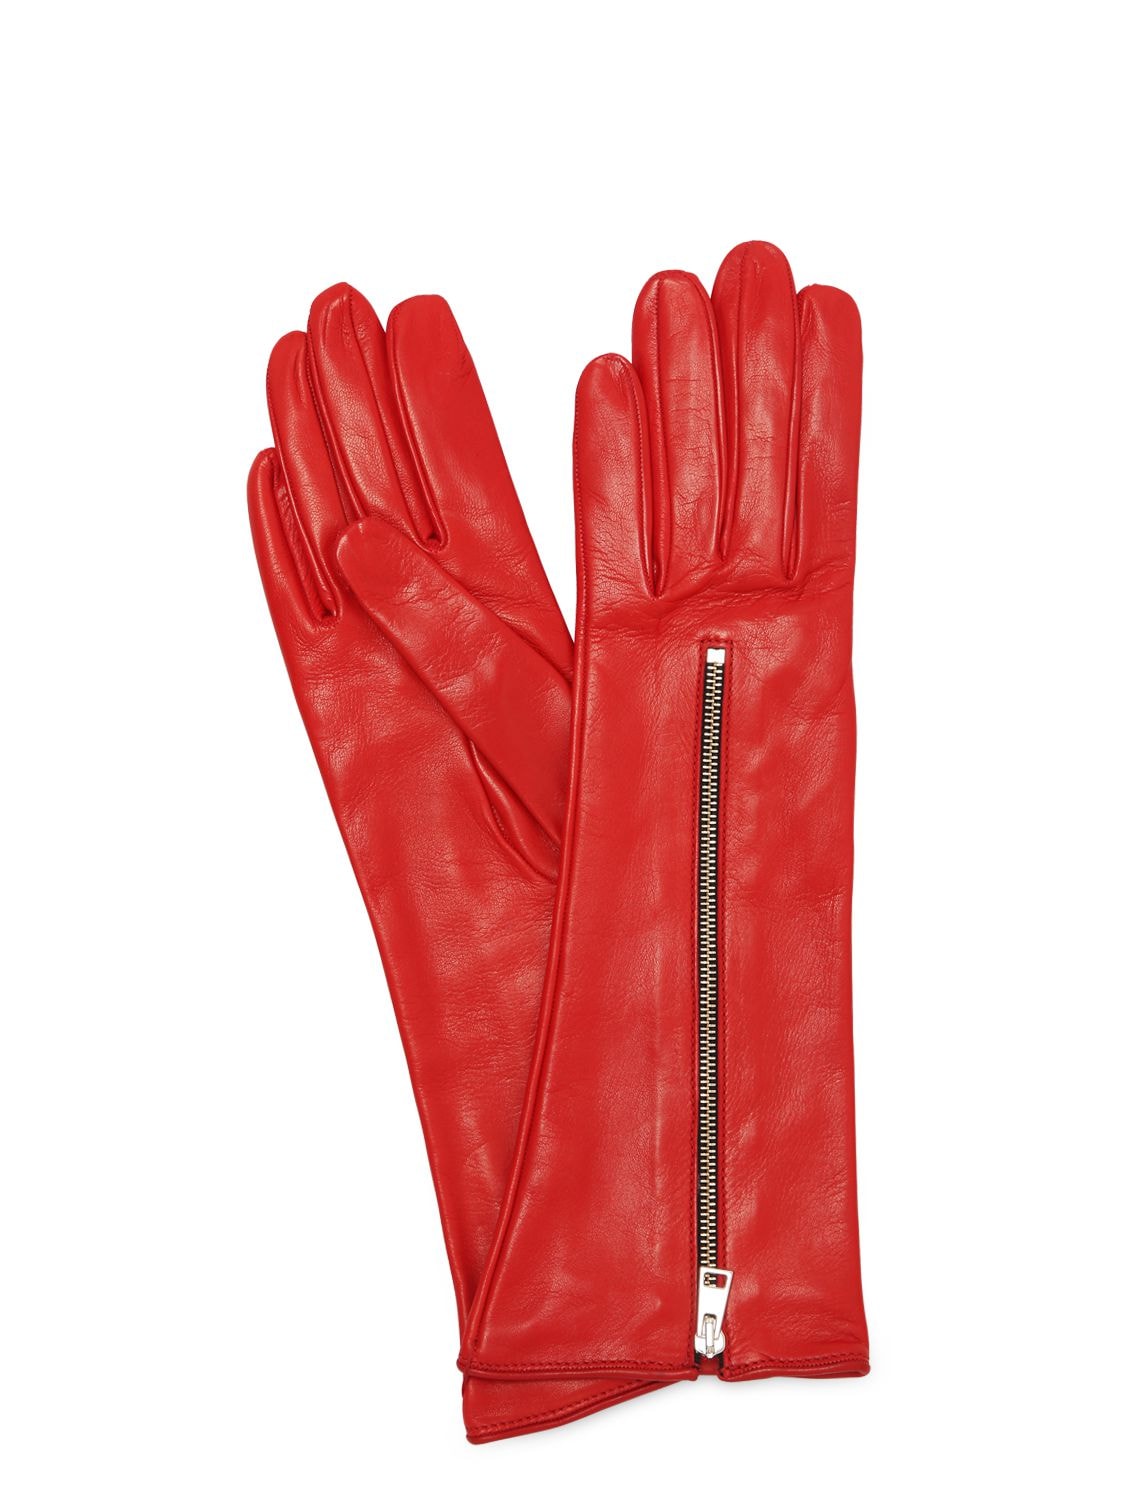 Mario Portolano Zipped Mid Leather Gloves In Red